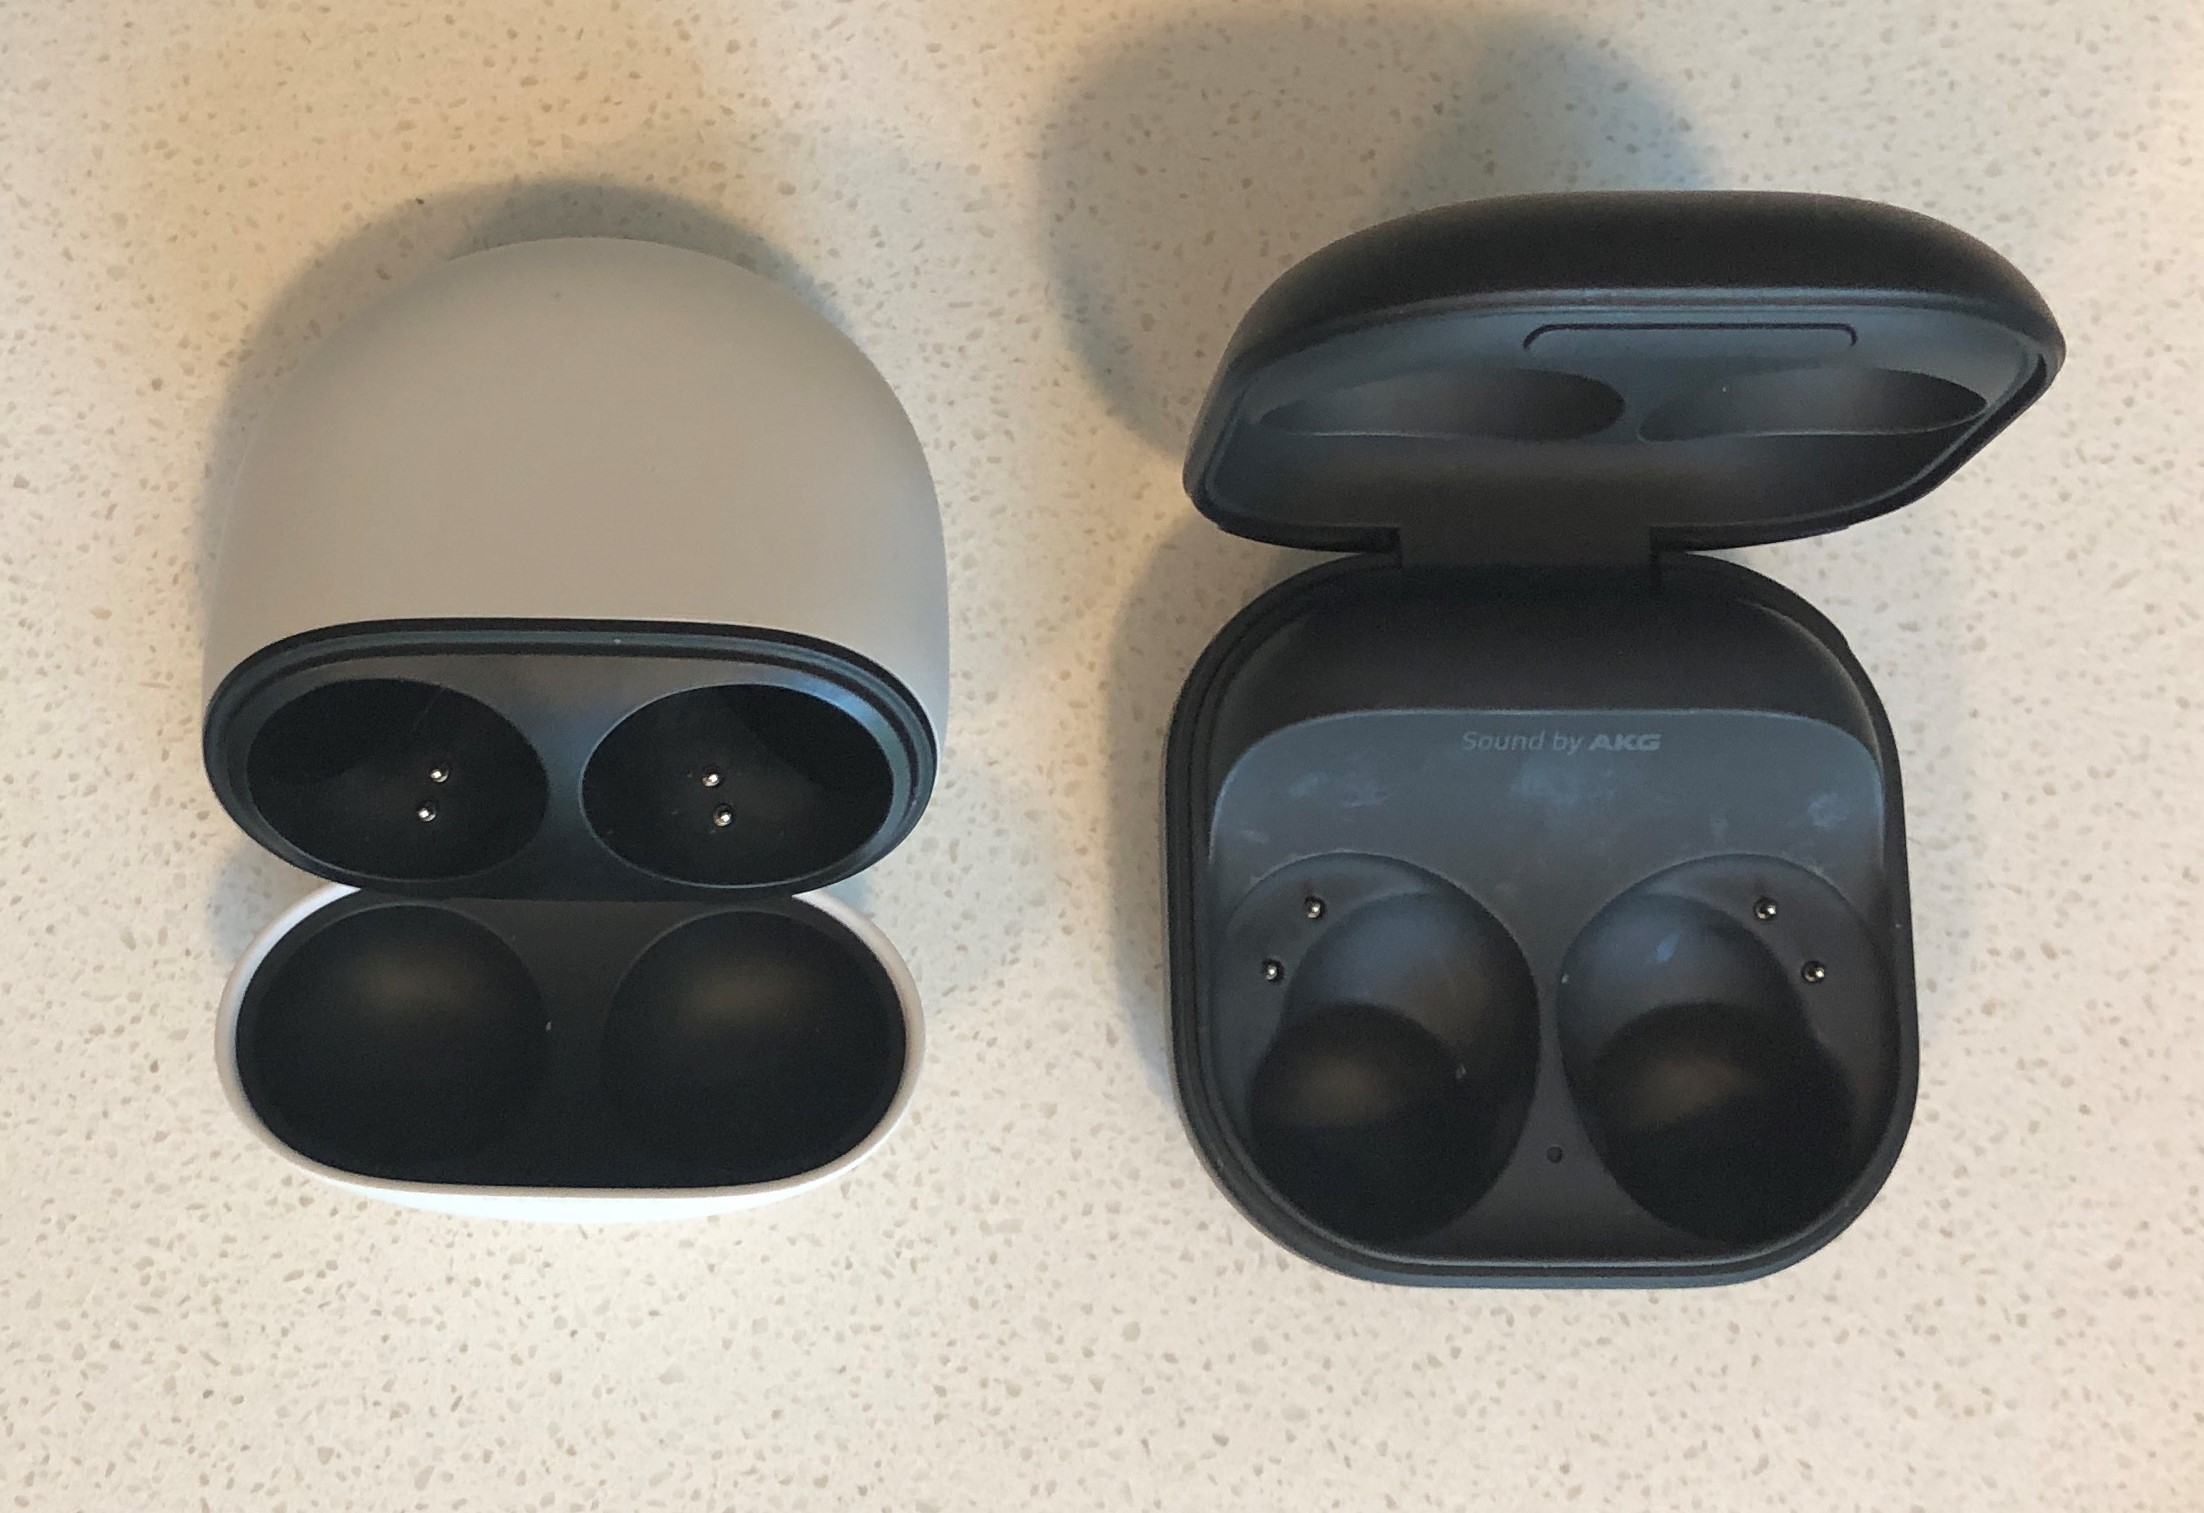 Google Pixel Buds Pro vs Samsung Galaxy Buds2 Pro charging and carrying case opened inside